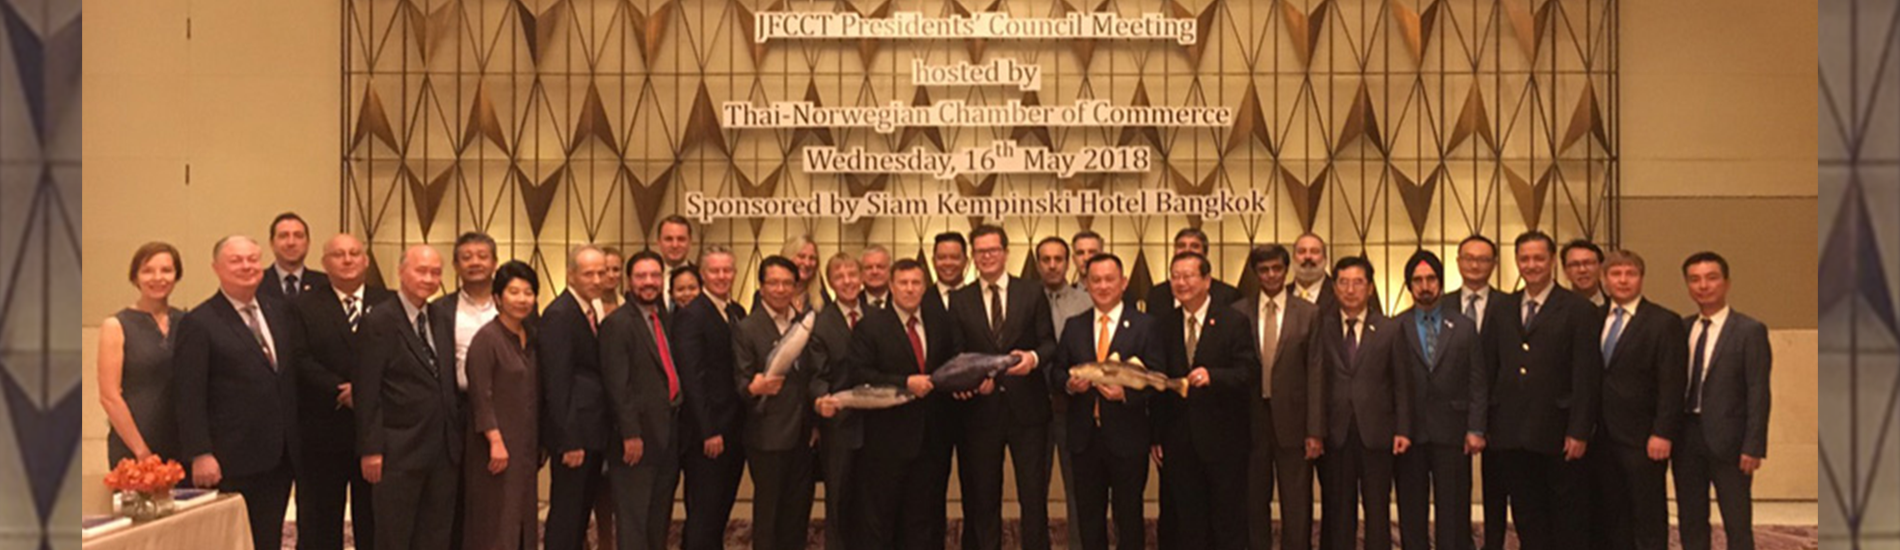 Norwegian Chamber Sucessfully Hosts JFCCT Presidents' Council Meeting